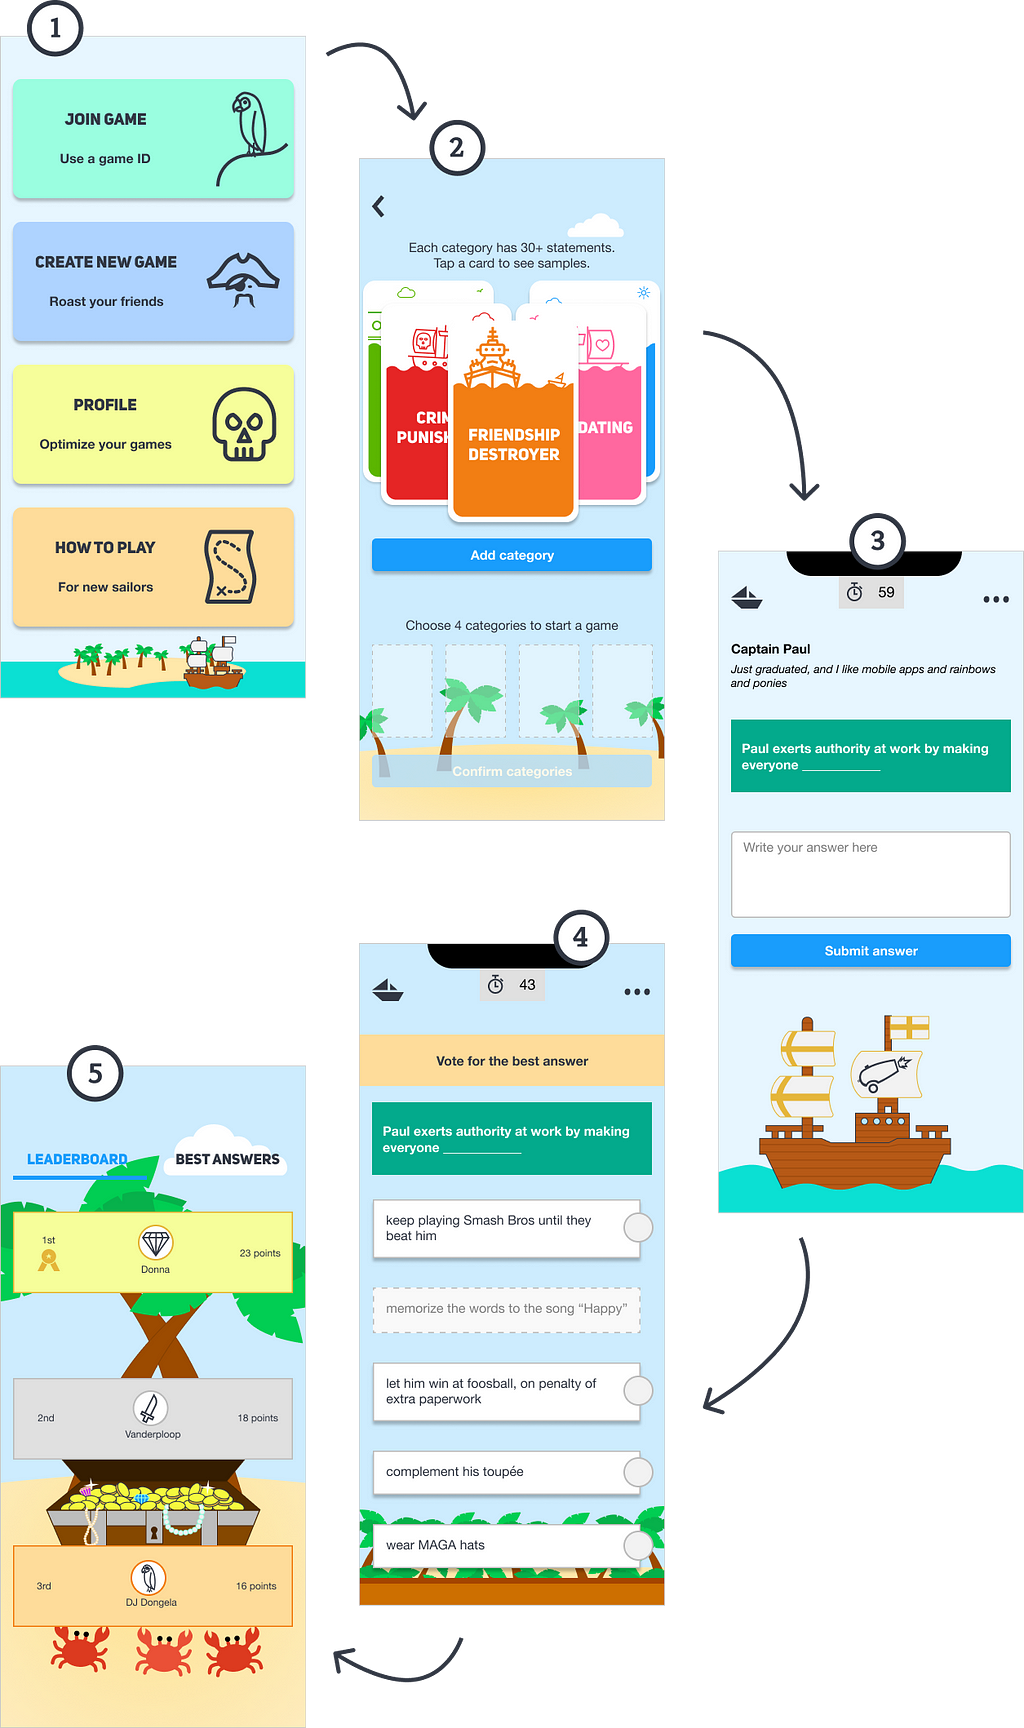 The user journey, explained in 5 different UI mockups